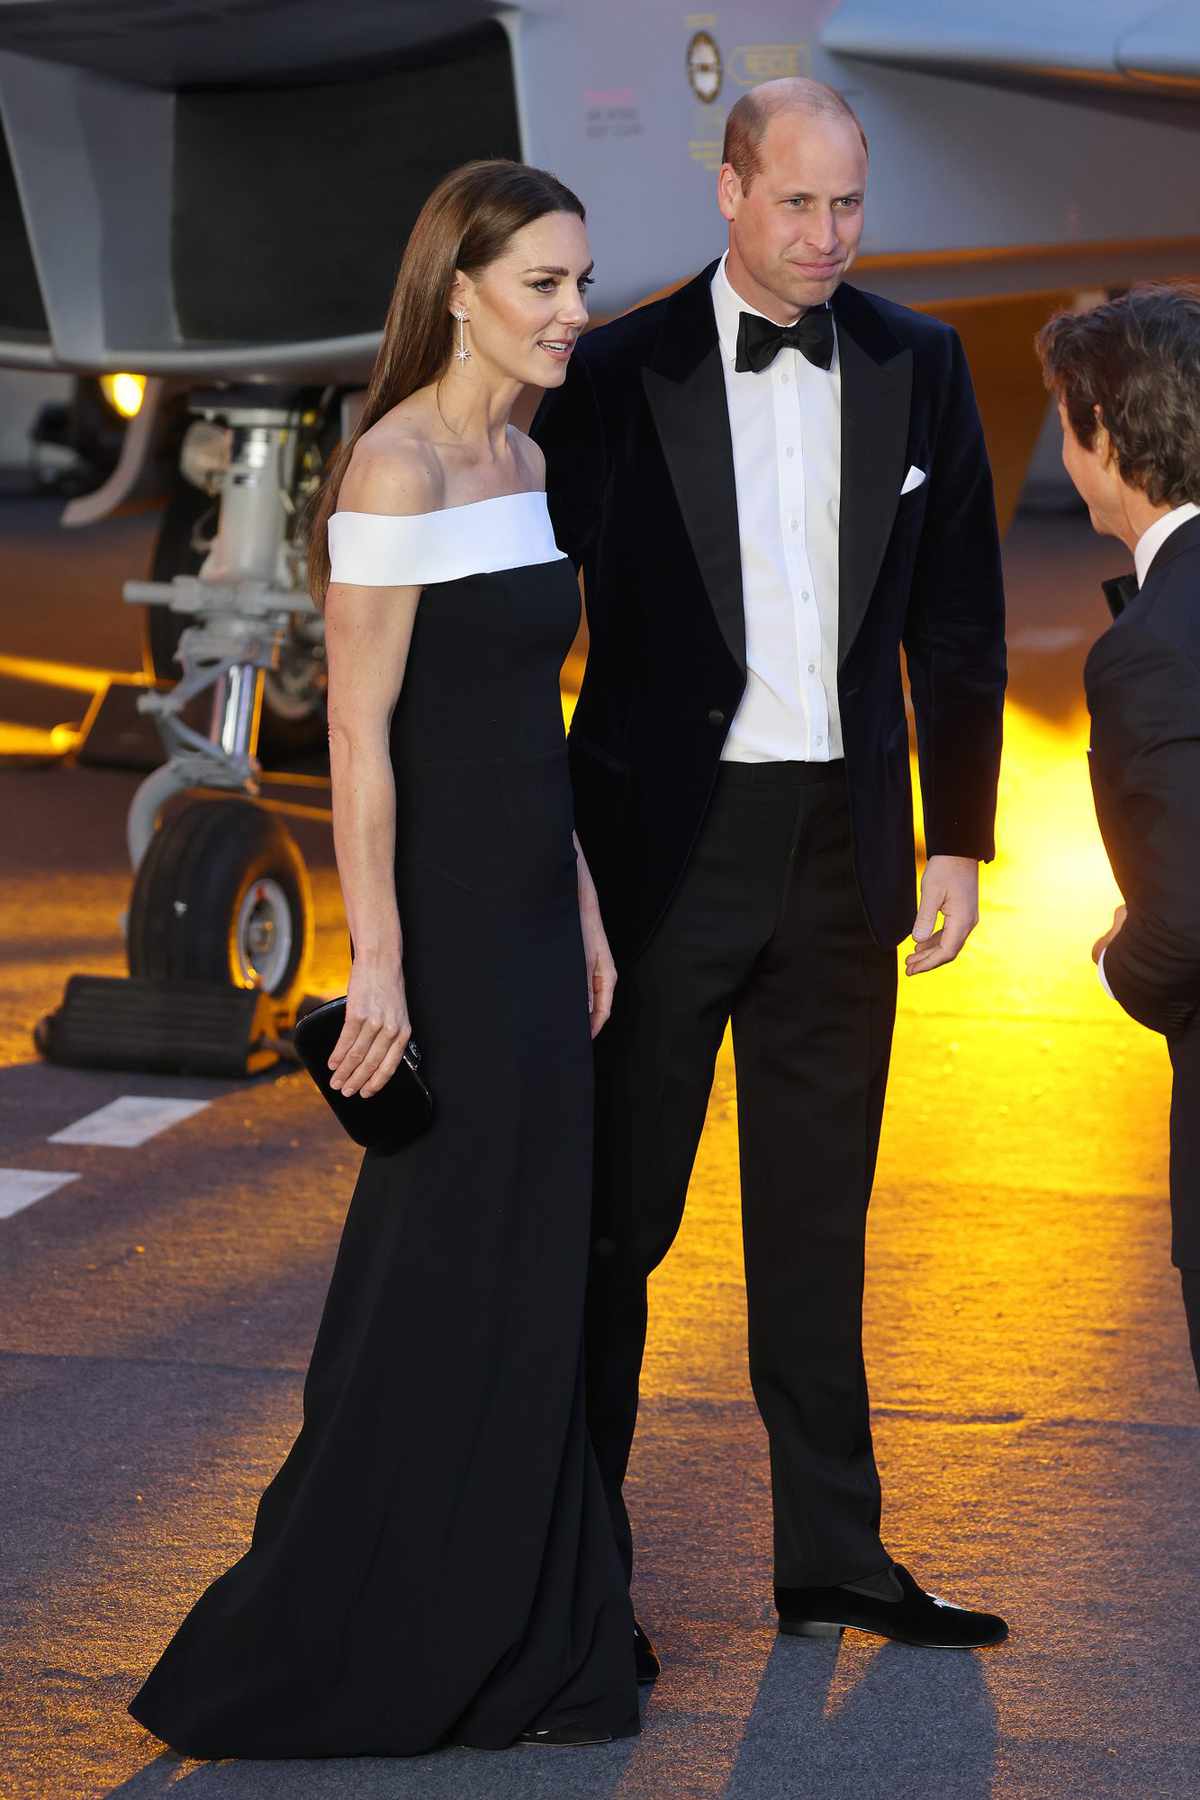 Kate Middleton and Prince William Looked Like Hollywood Royalty at the Top Gun: Maverick Premiere